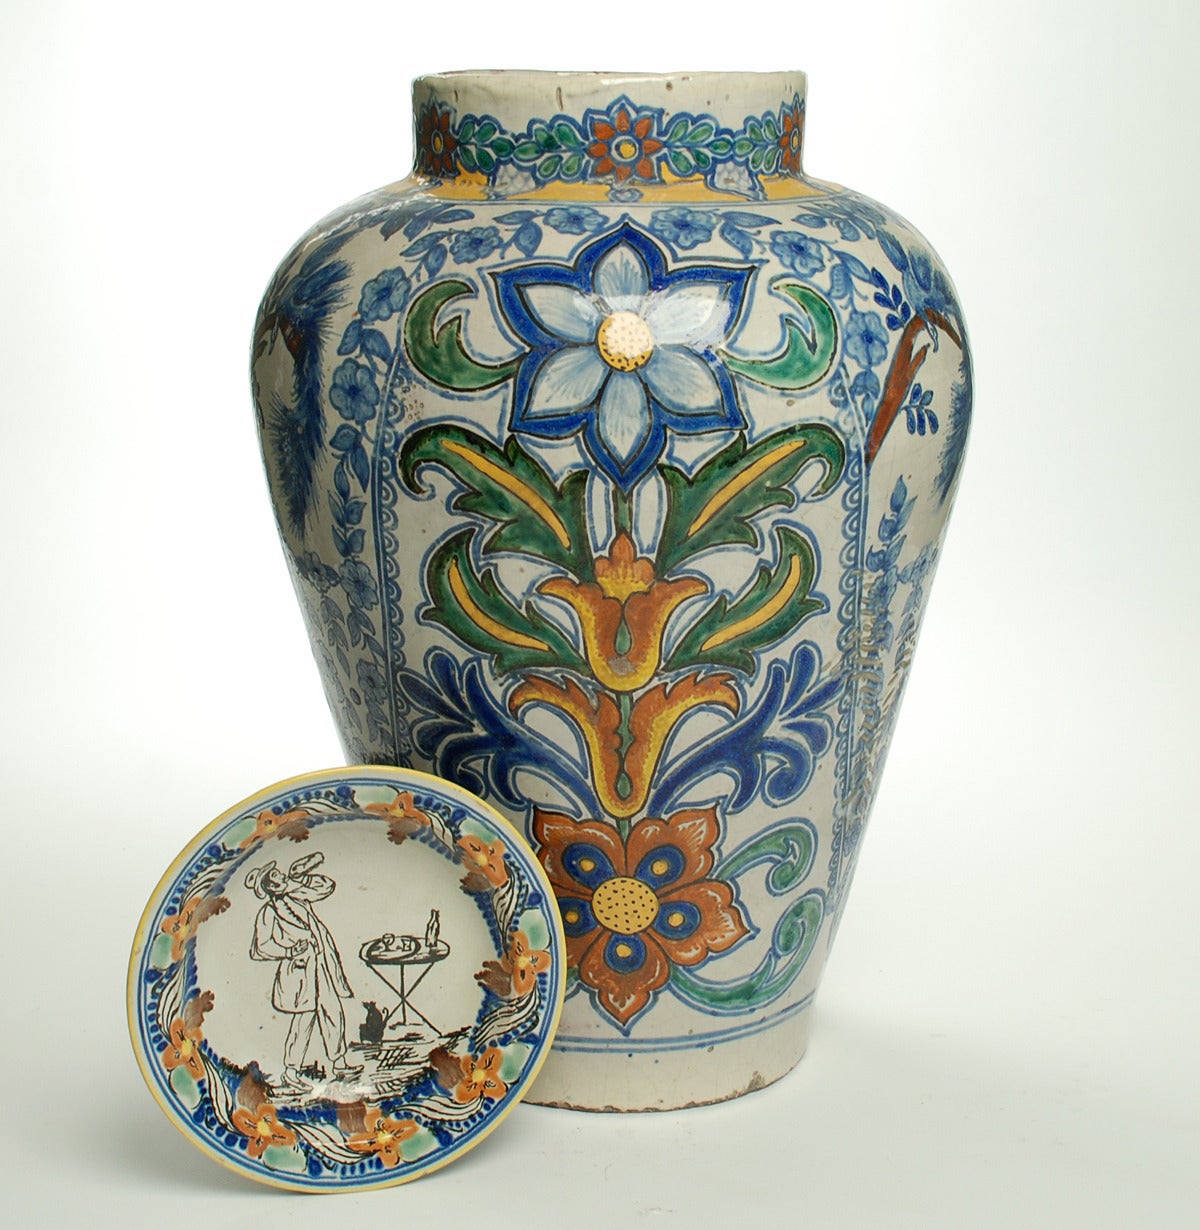 This large late 19th century talavera Poblana Jarron is decorated all-over in deep shades of blue, green yellow and red with birds and colorful foliate patterns separated by ring borders and geometric motifs. Beautiful cobalt glaze over a milk white